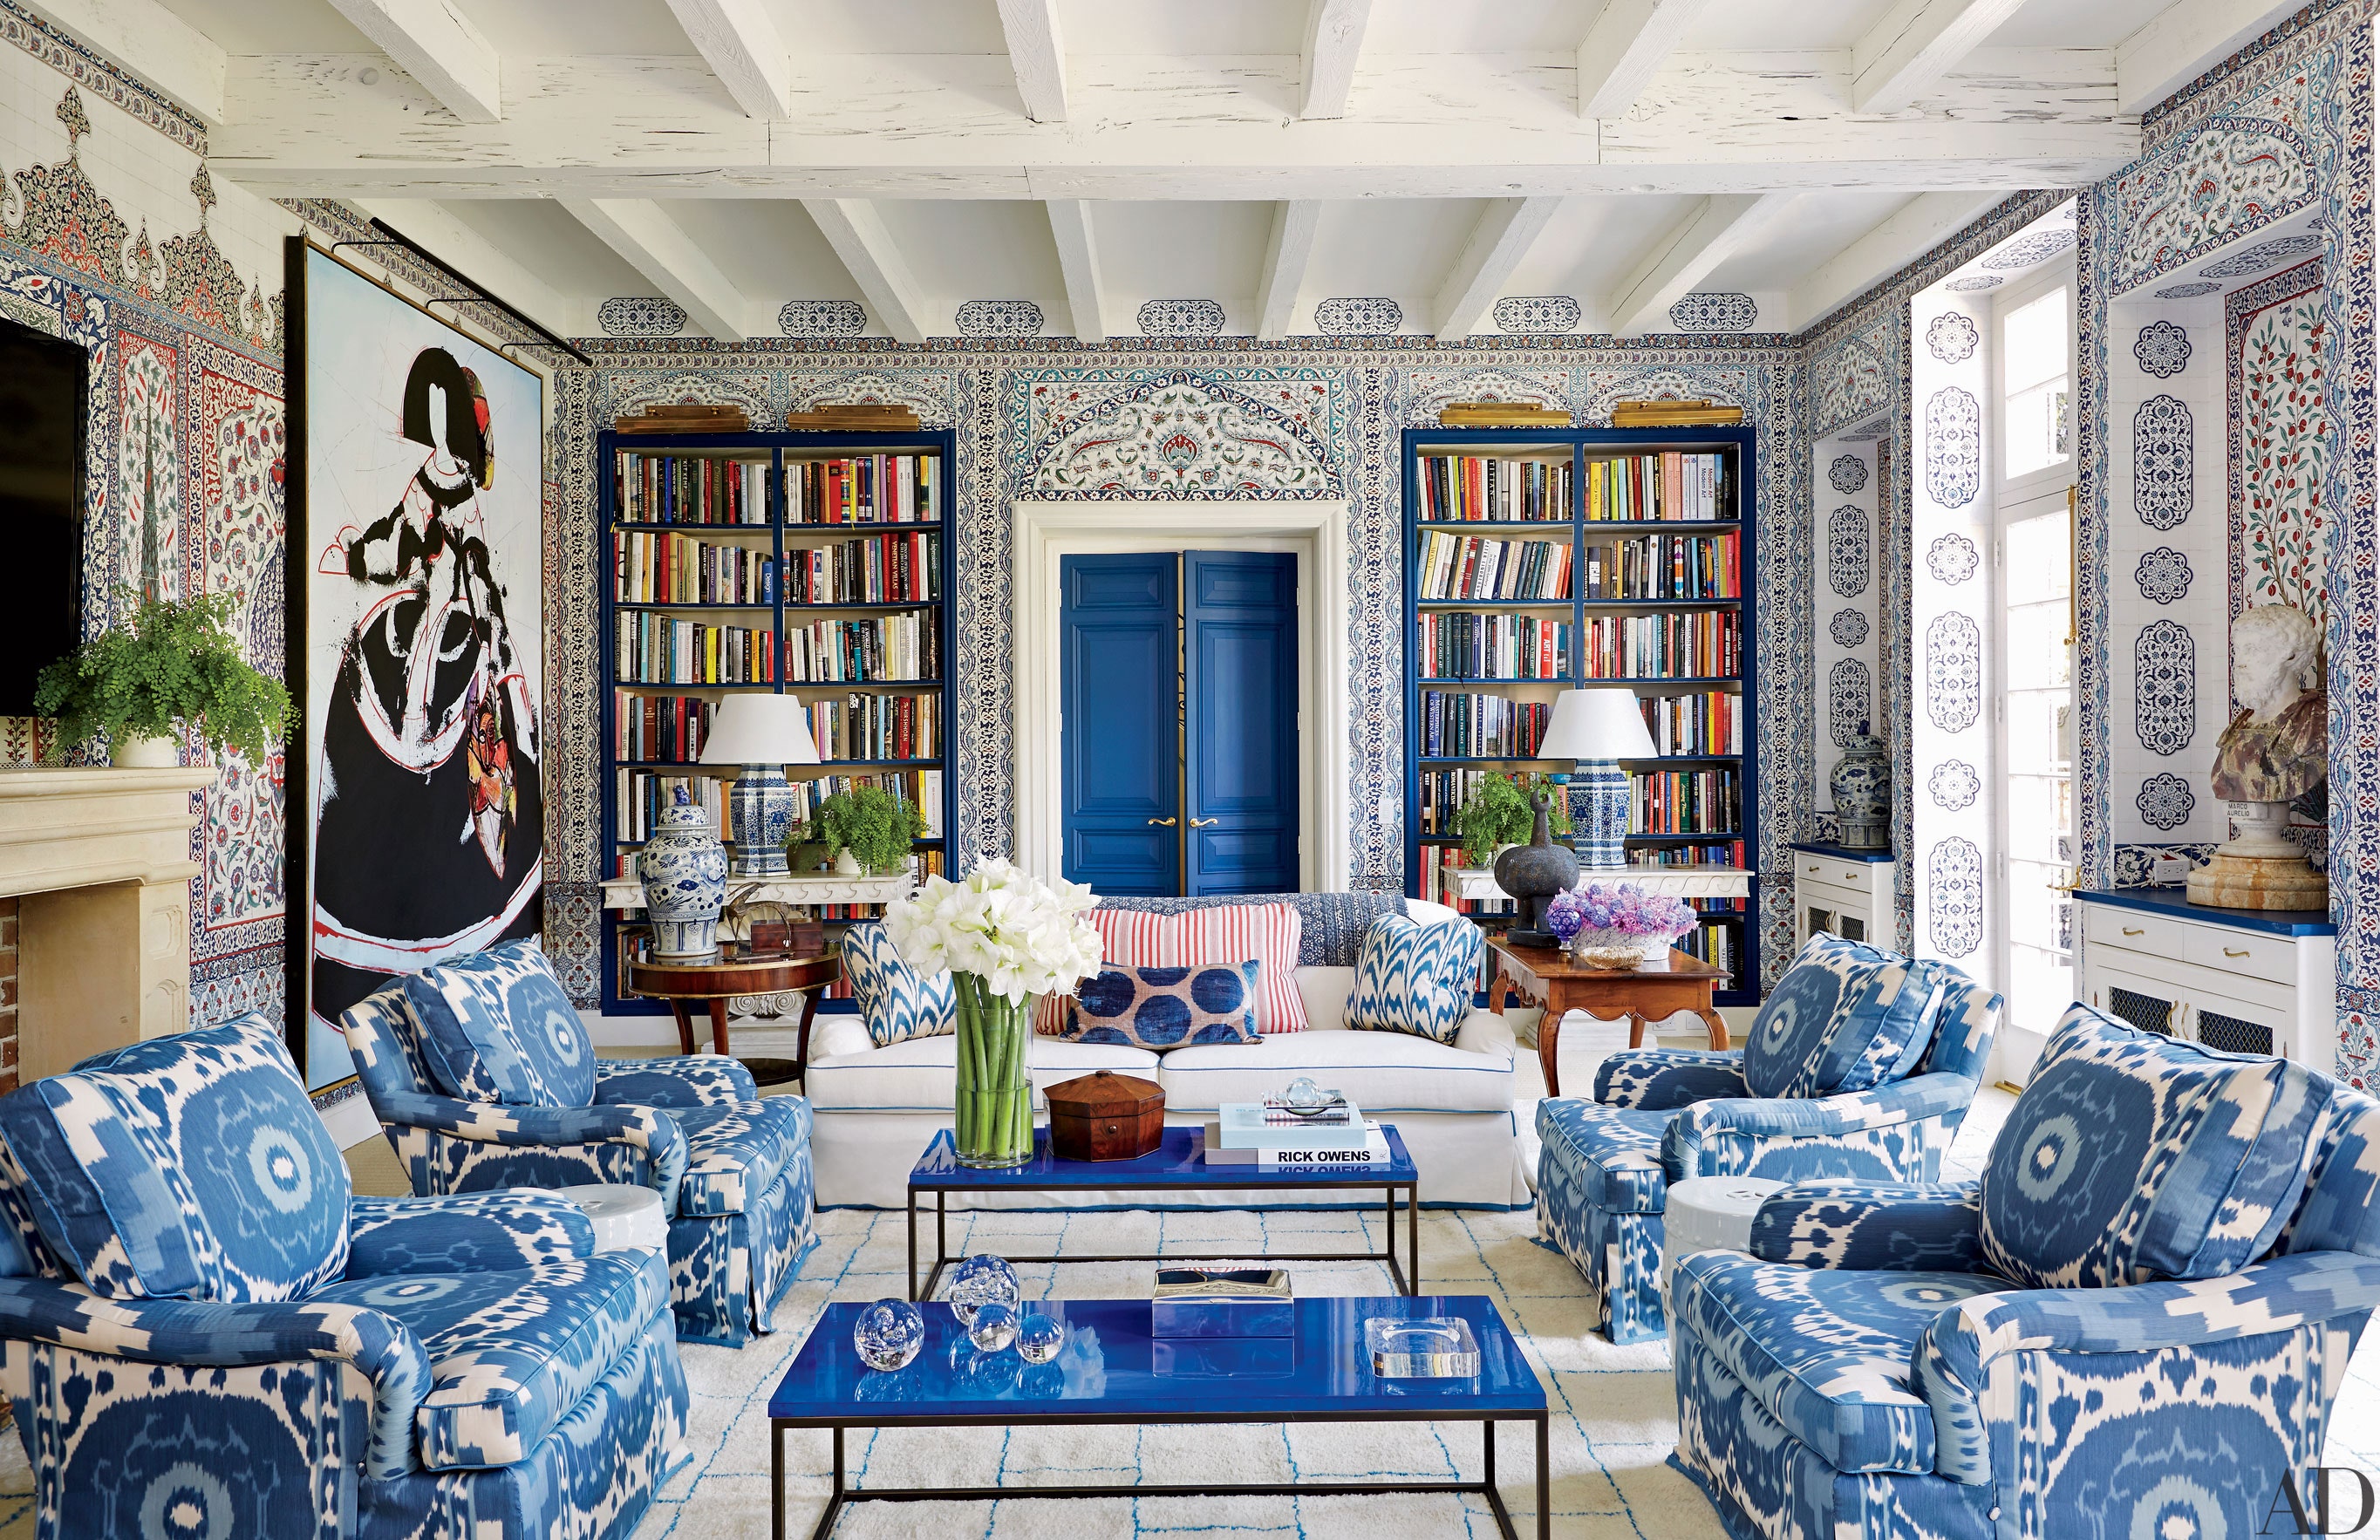 Wallpaper Ideas For Every Room Architectural Digest